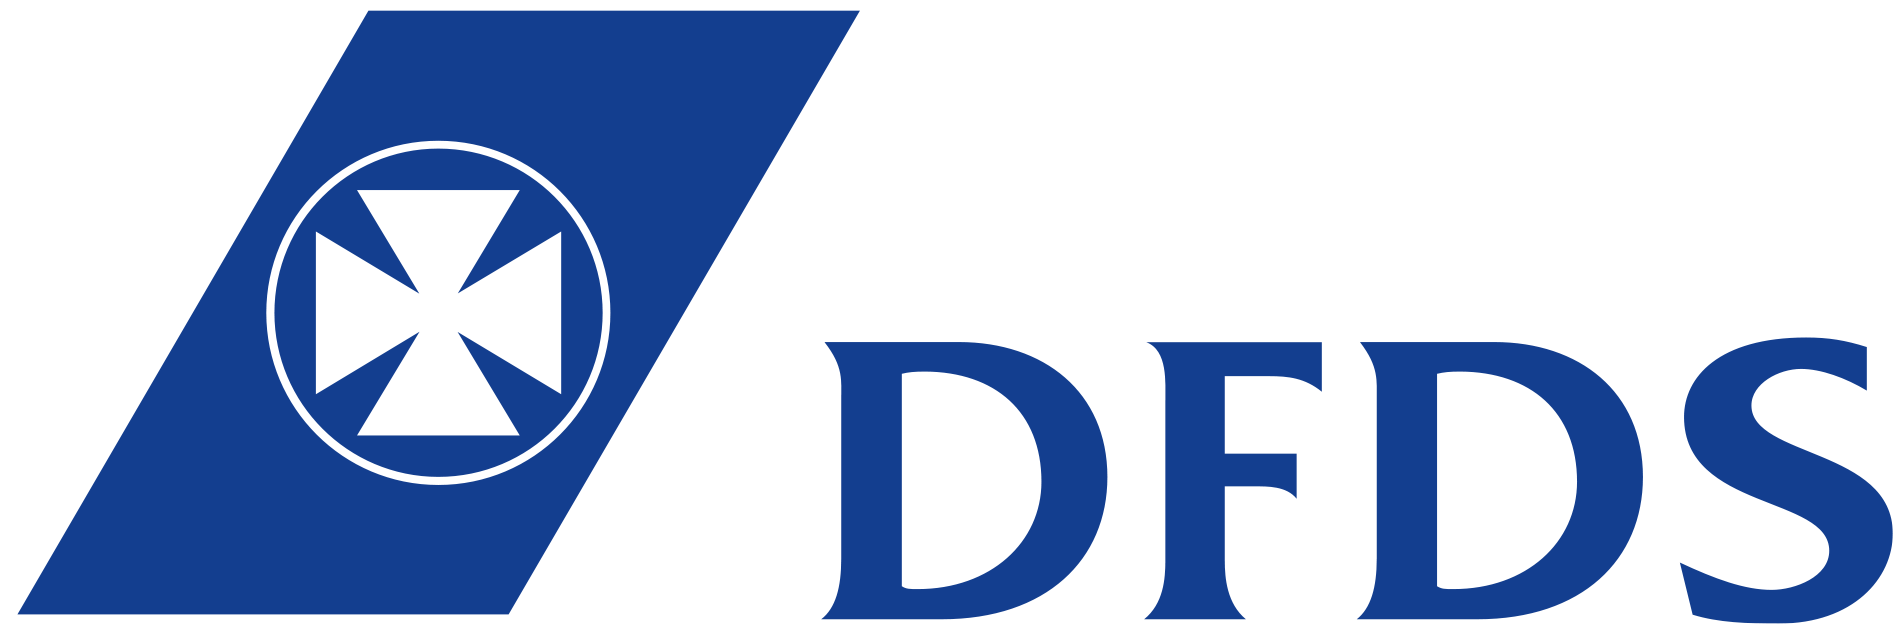 Download Dfds Logo Dfds Seaways Logo Png Image With No Background Pngkey Com